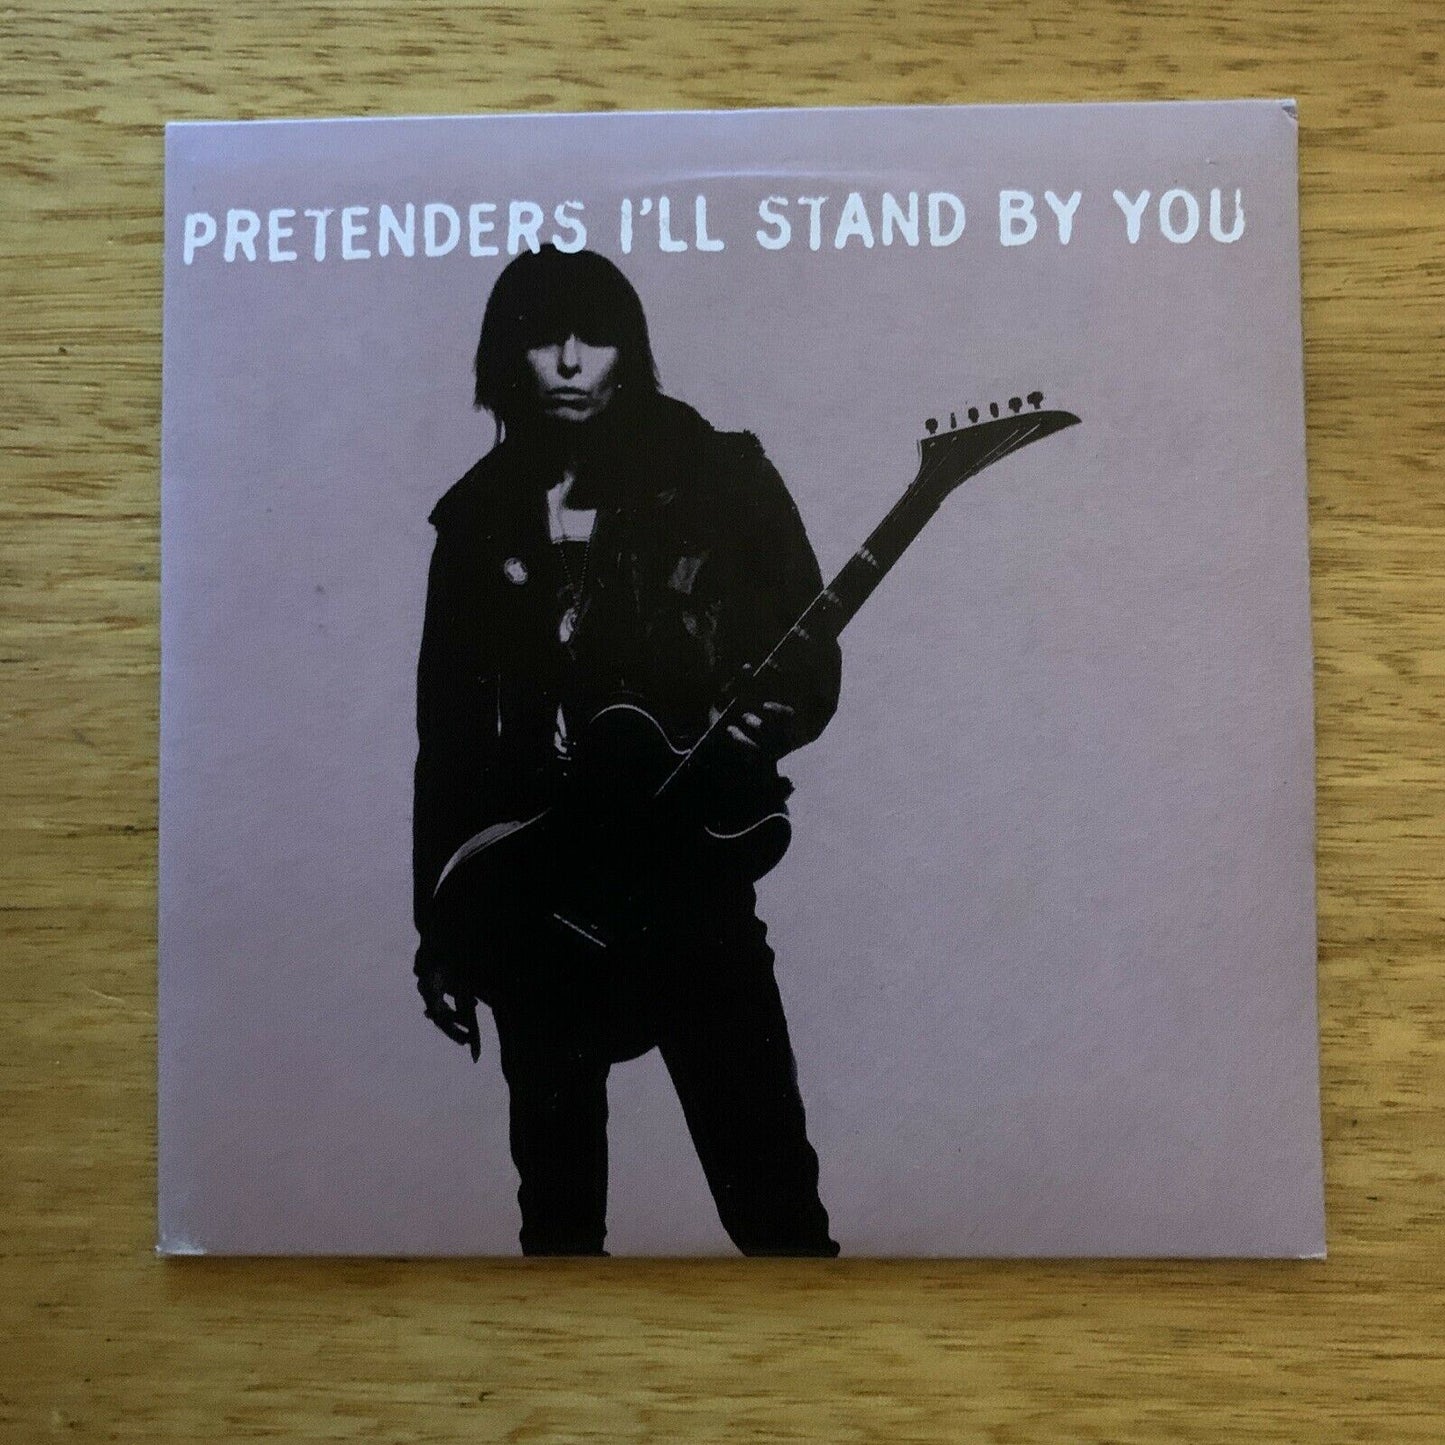 I'll Stand By You (plus 'Rebel rock me', 'Bold as love', 1993) - Pretenders CD